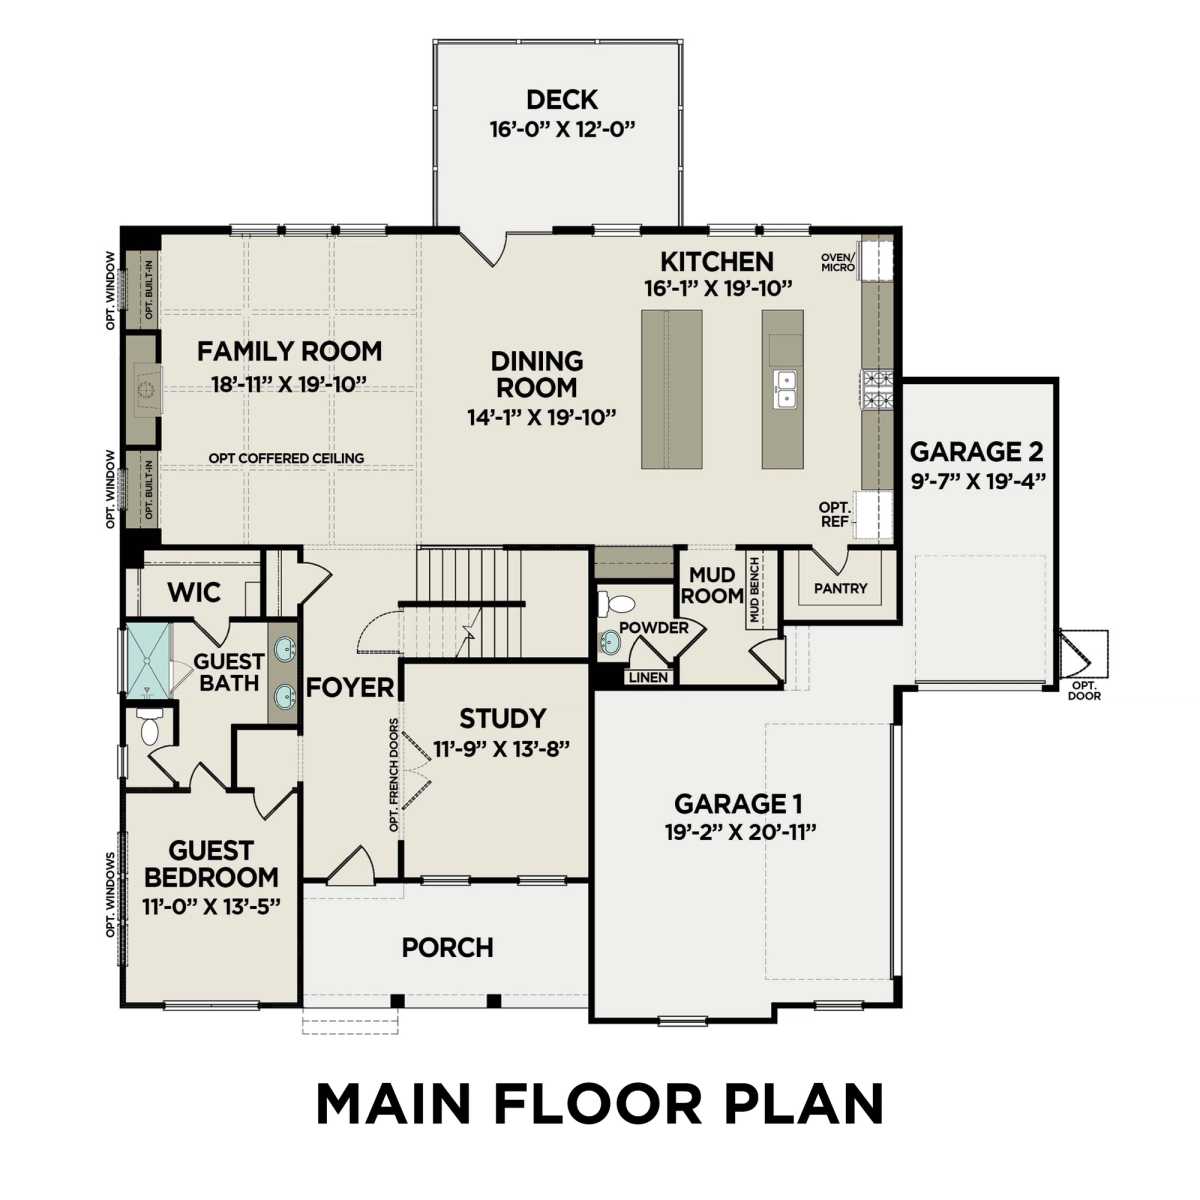 1 - The Arlington A floor plan layout for 4964 Concert Lane in Davidson Homes' Tanglewood community.